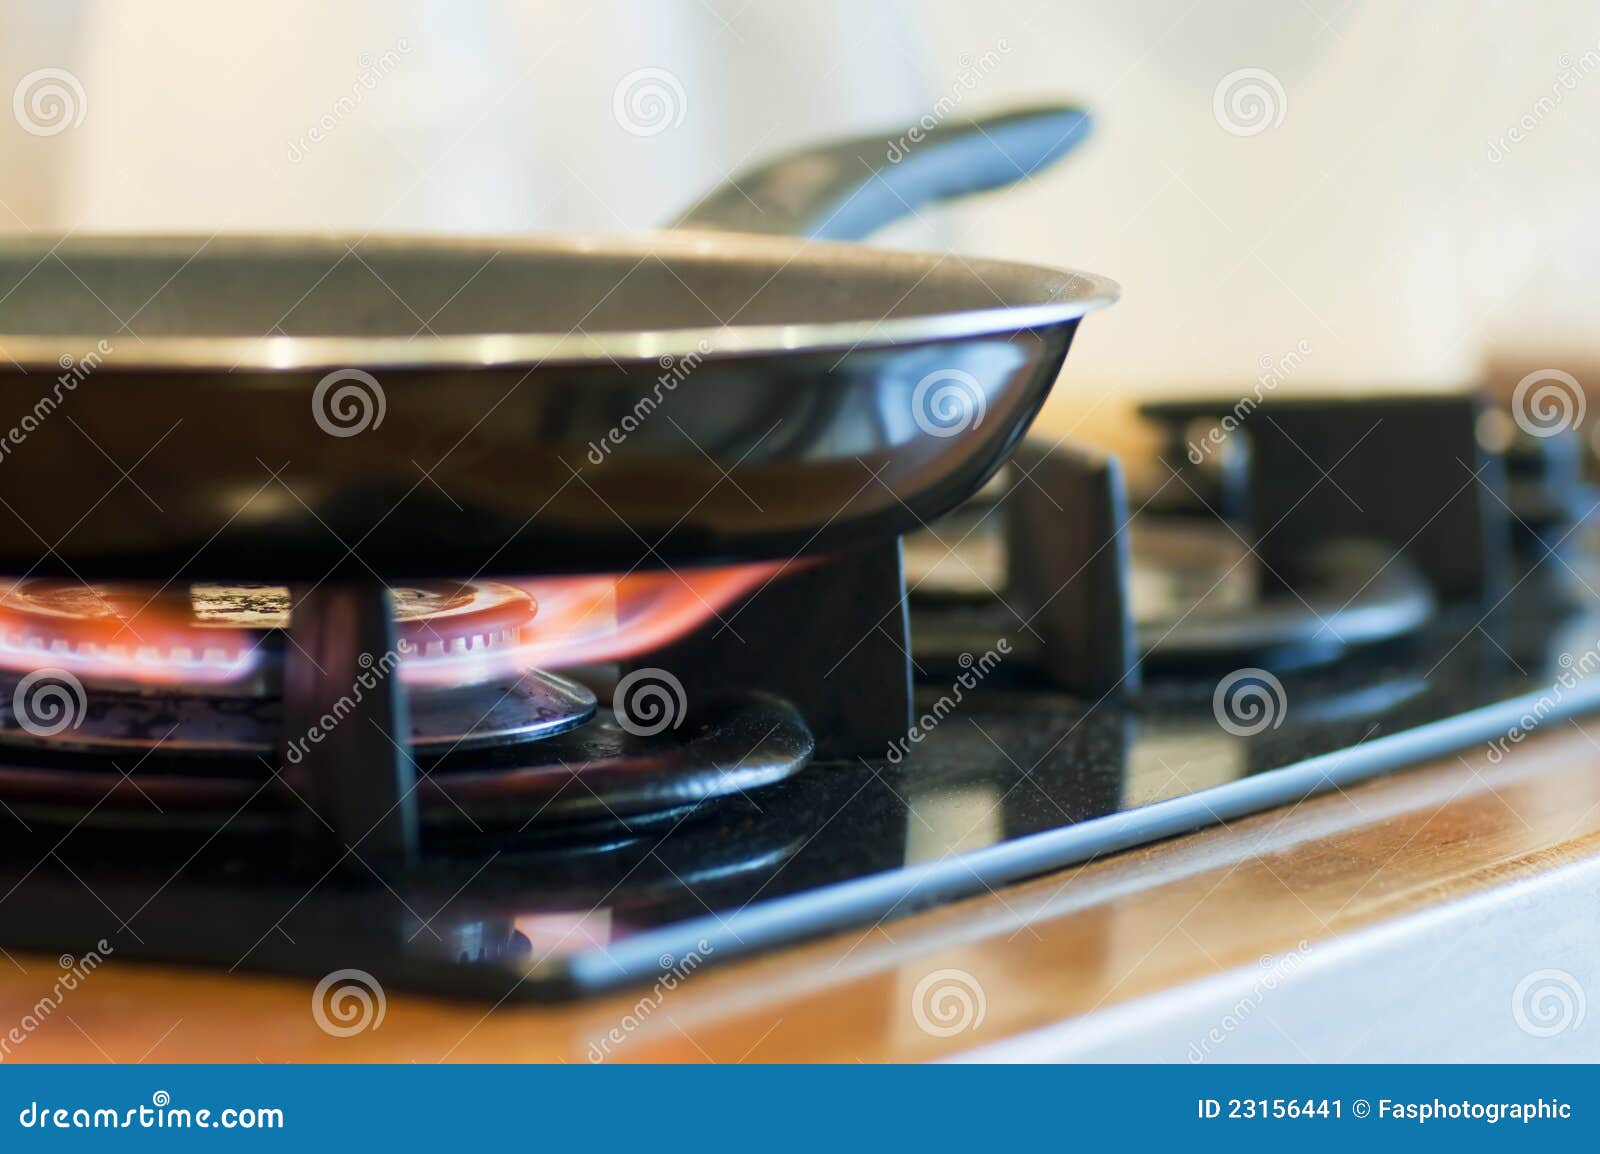 natural gas cooker